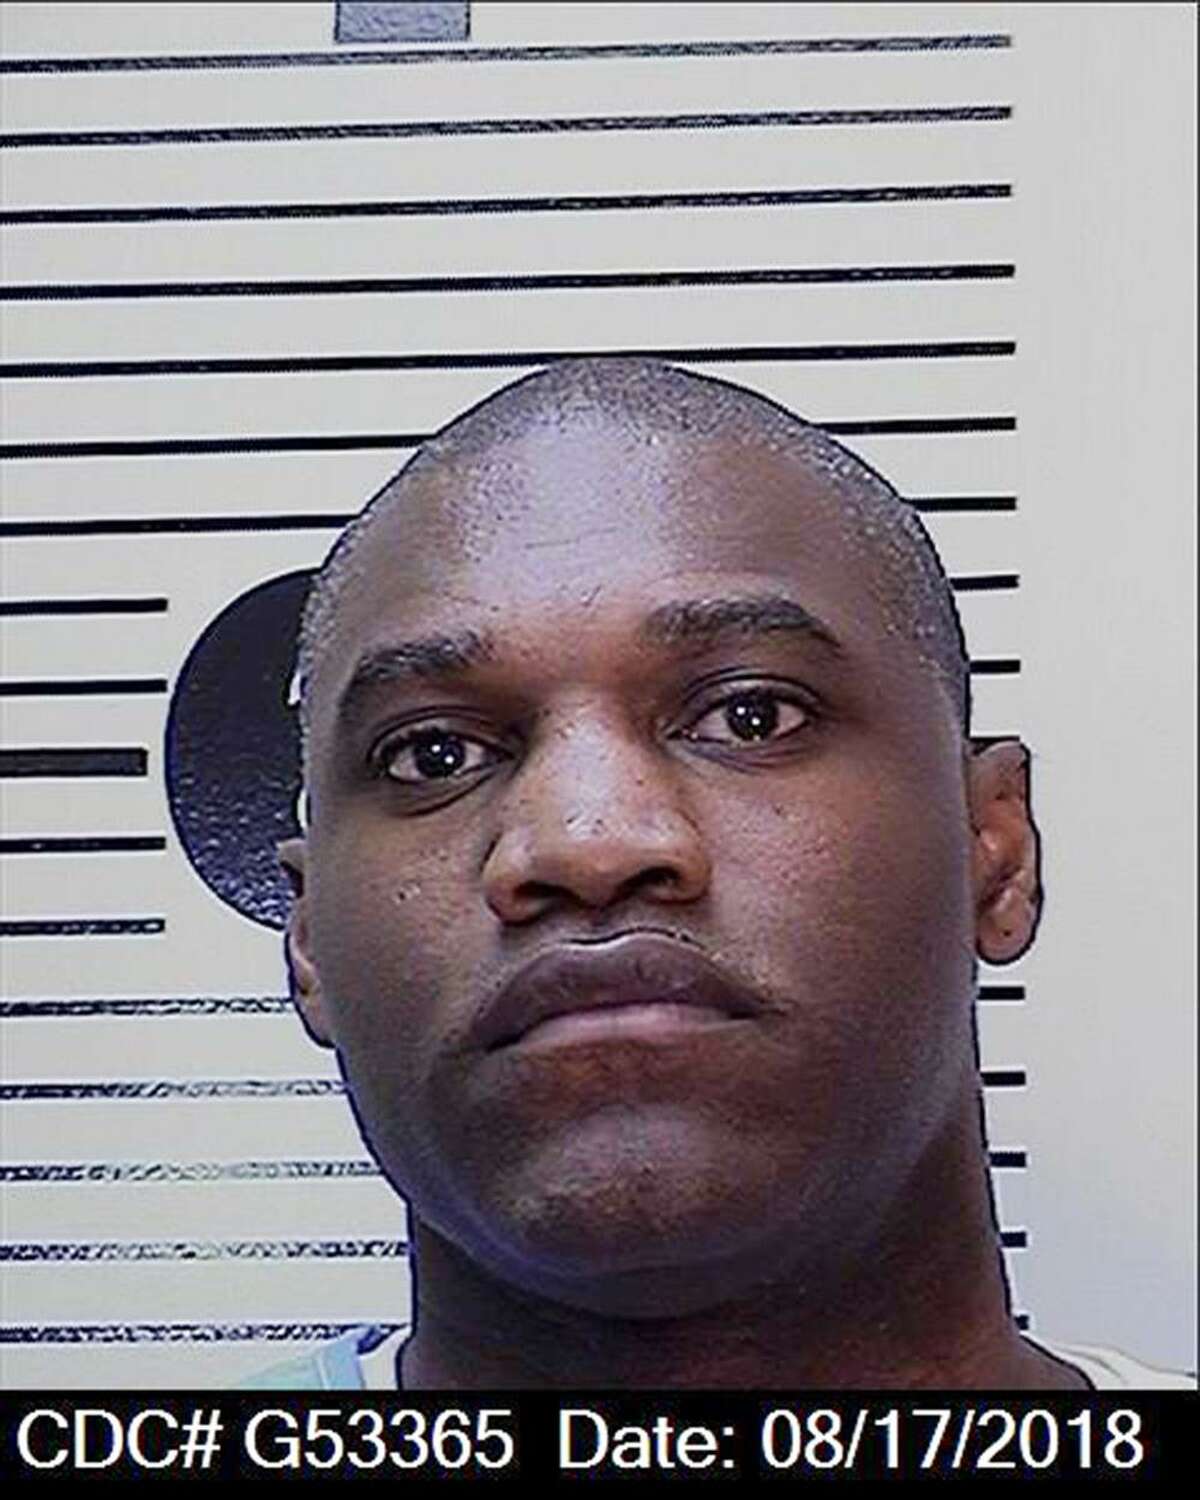 California Death Row inmate Donte McDaniel is challenging the sentencing phase of Death Row court cases.